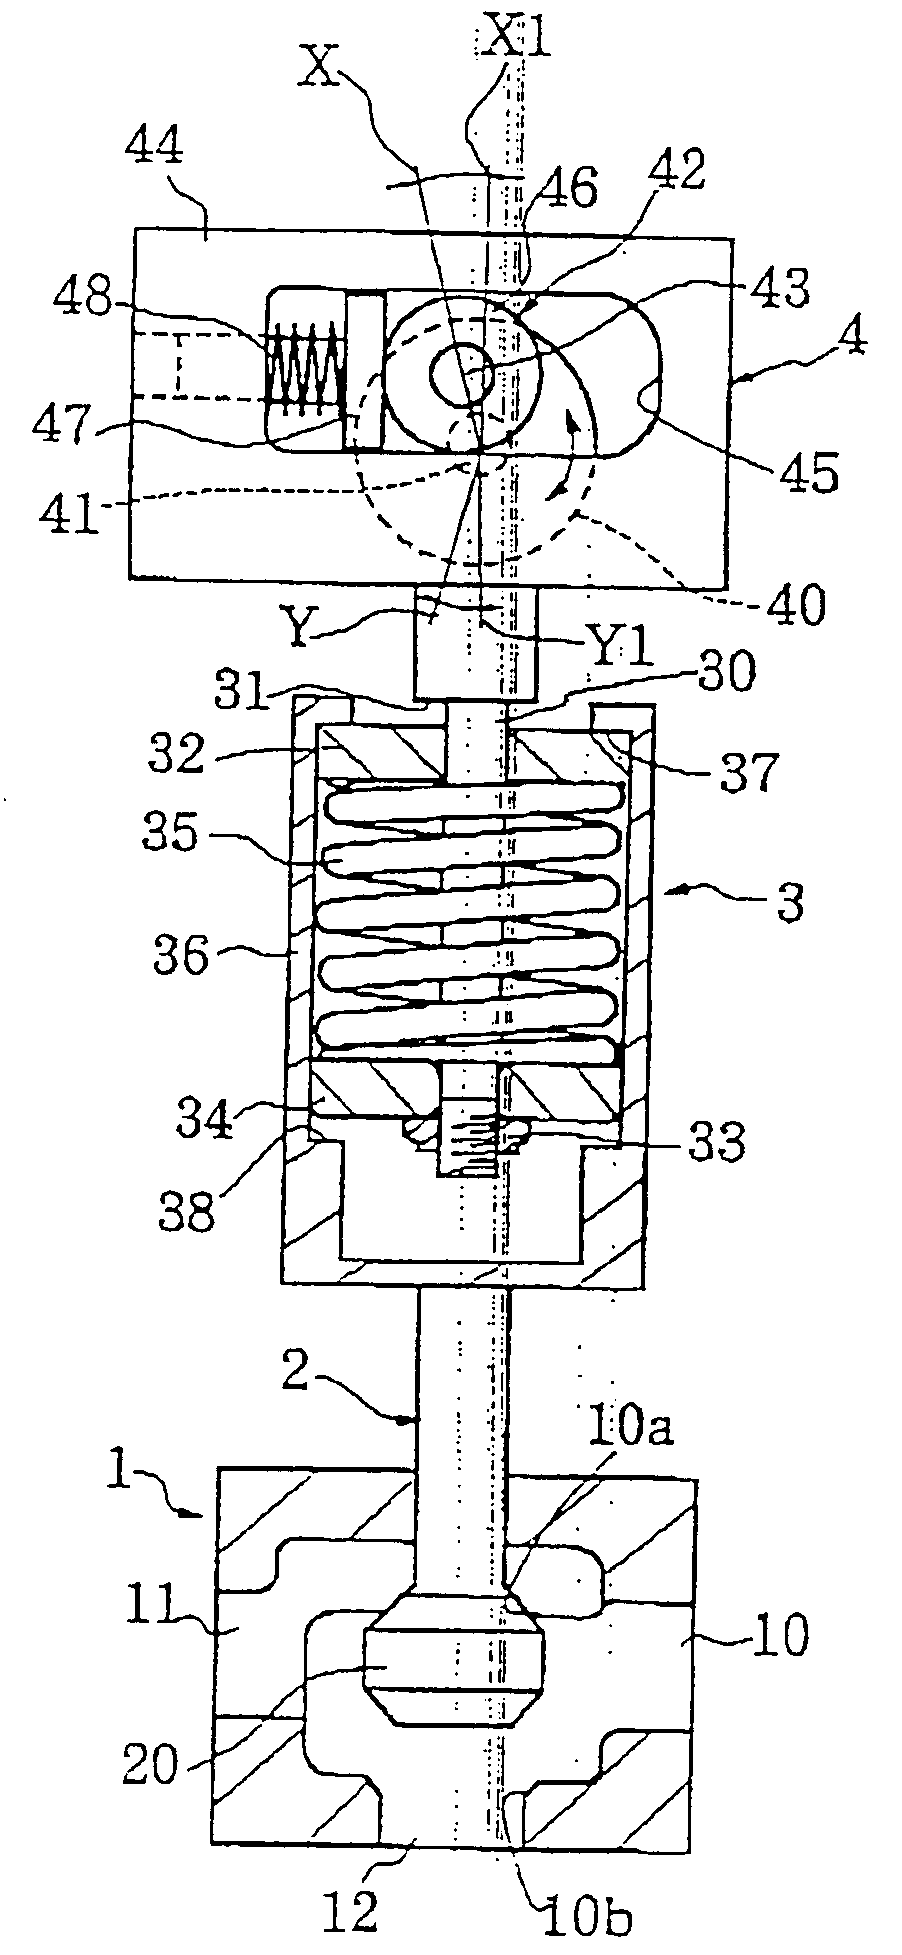 Direct-driven motor-operated valve